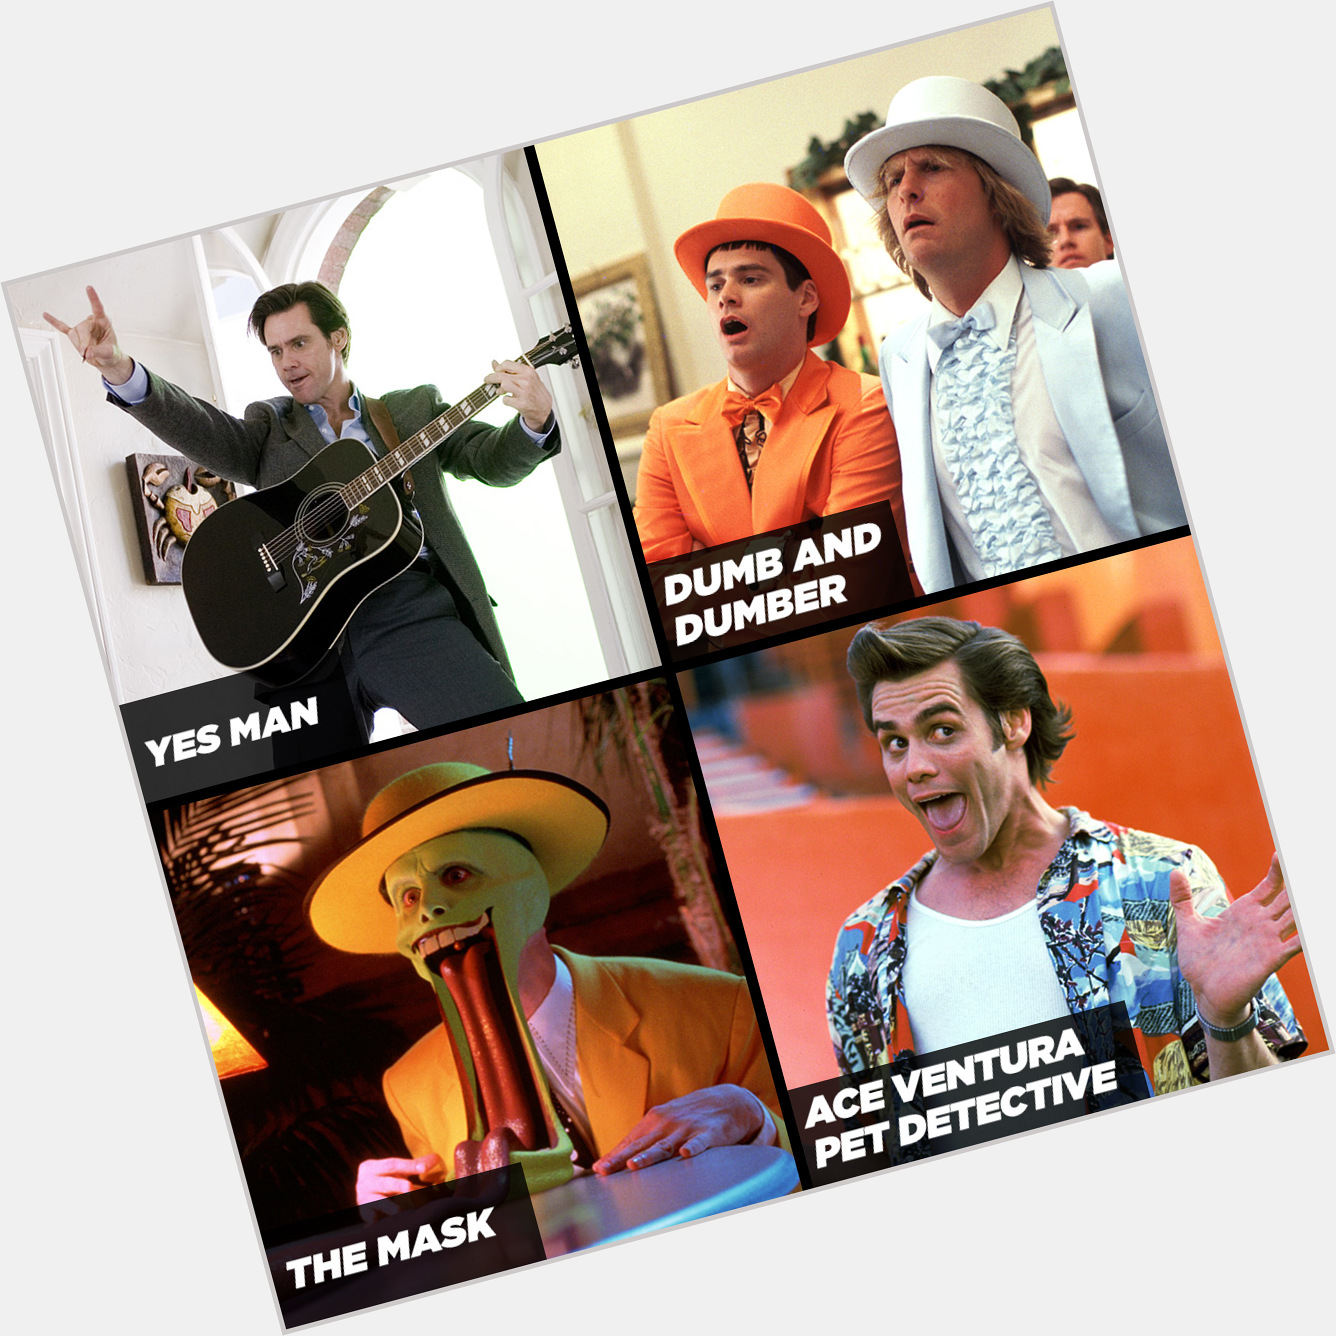 Happy Birthday to Jim Carrey! Brighten your day with his hilarious films, which one is your favourite? 